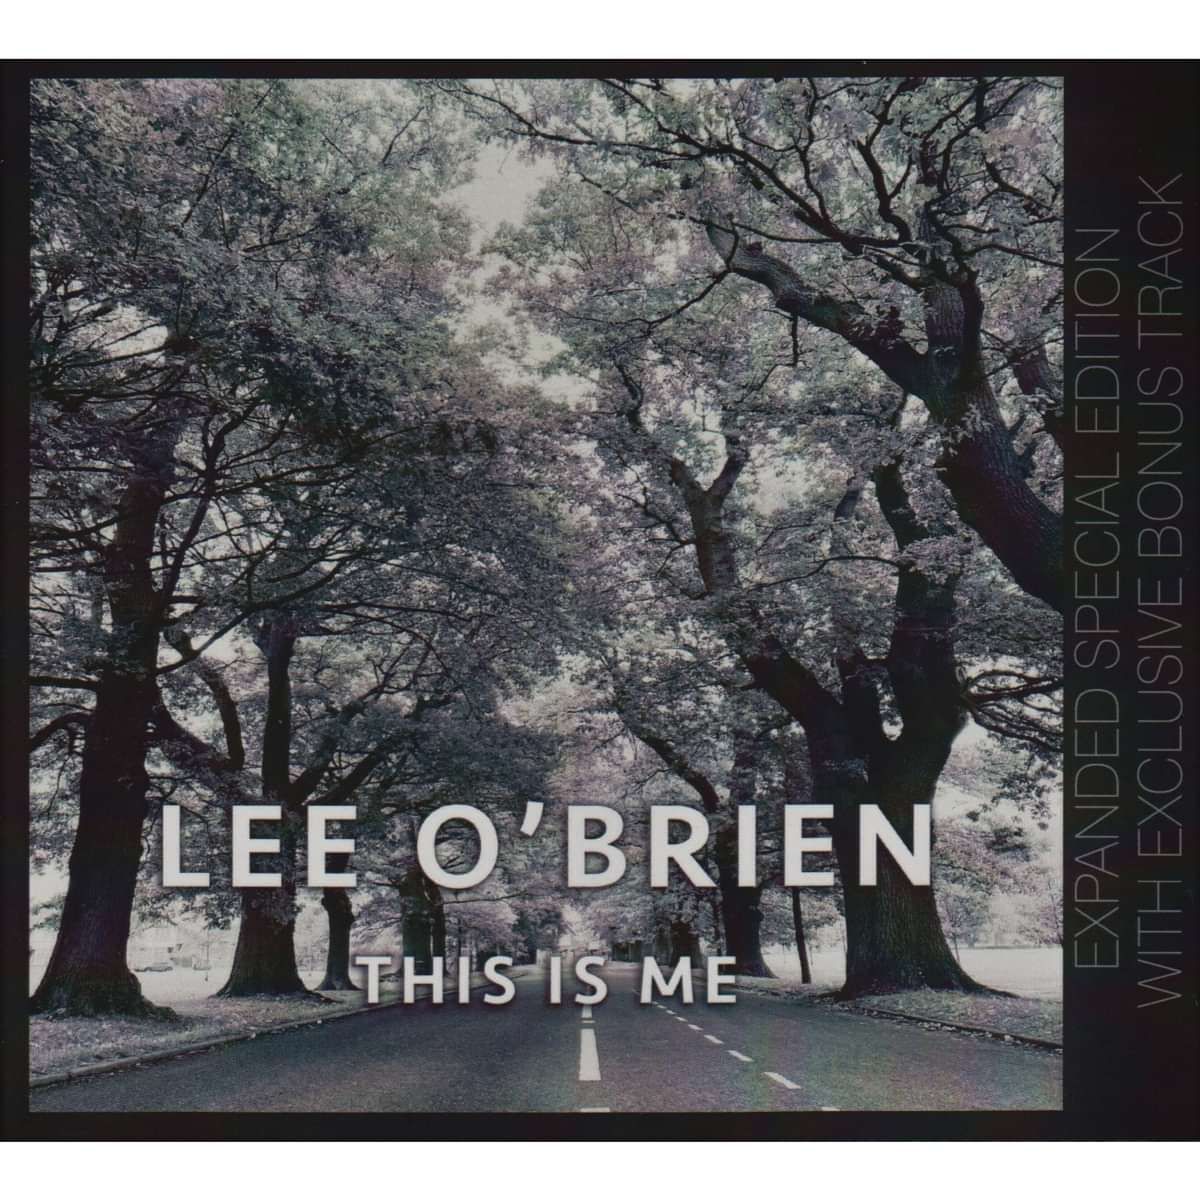 Lee O'Brien - This Is Me - CD [Recorded with Status Quo's Francis Rossi] - Barrel And Squidger Records